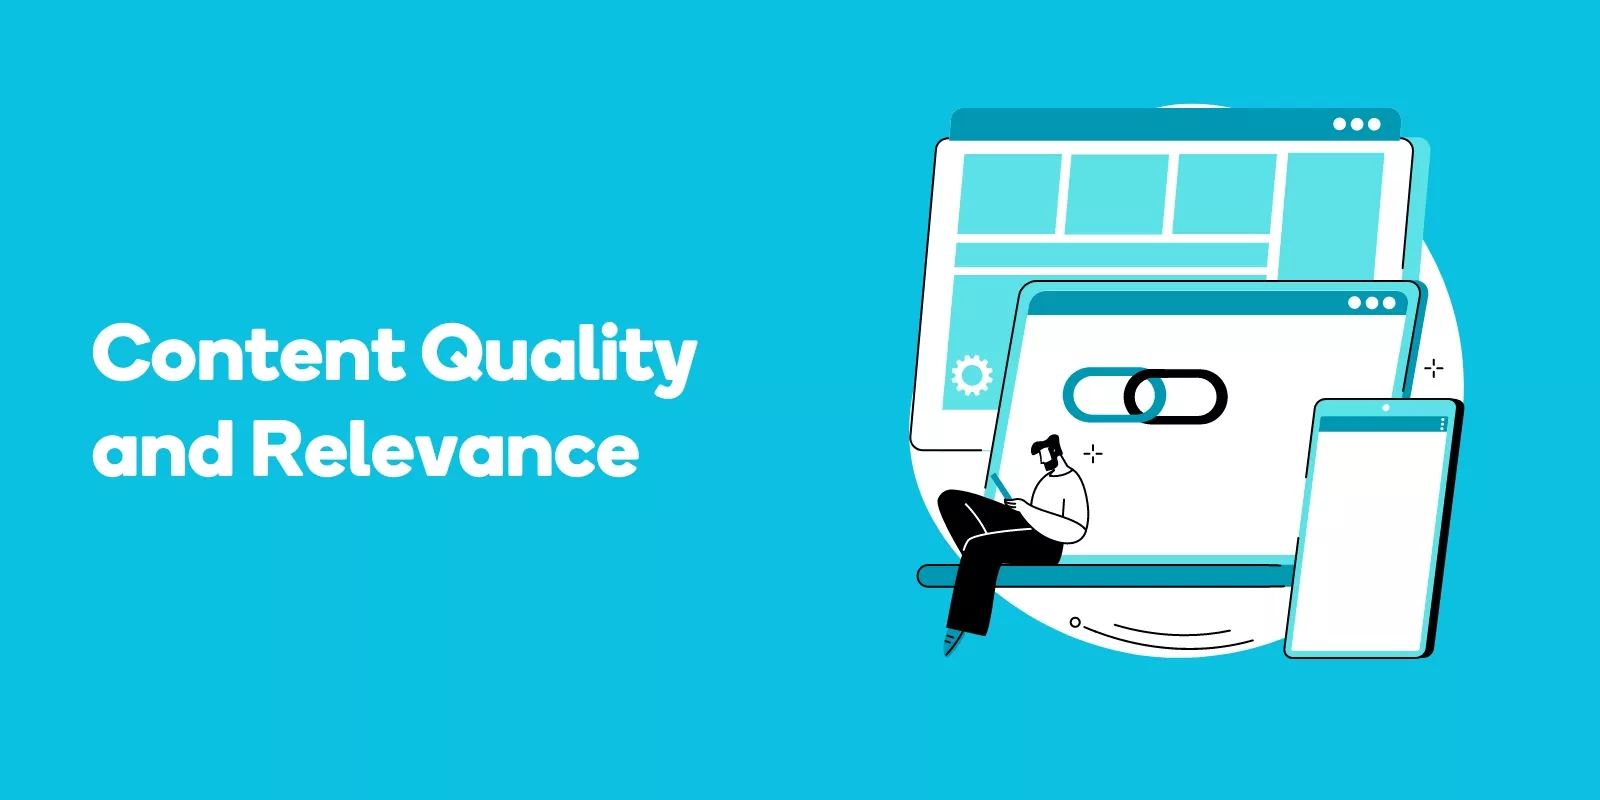 Content Quality and Relevance